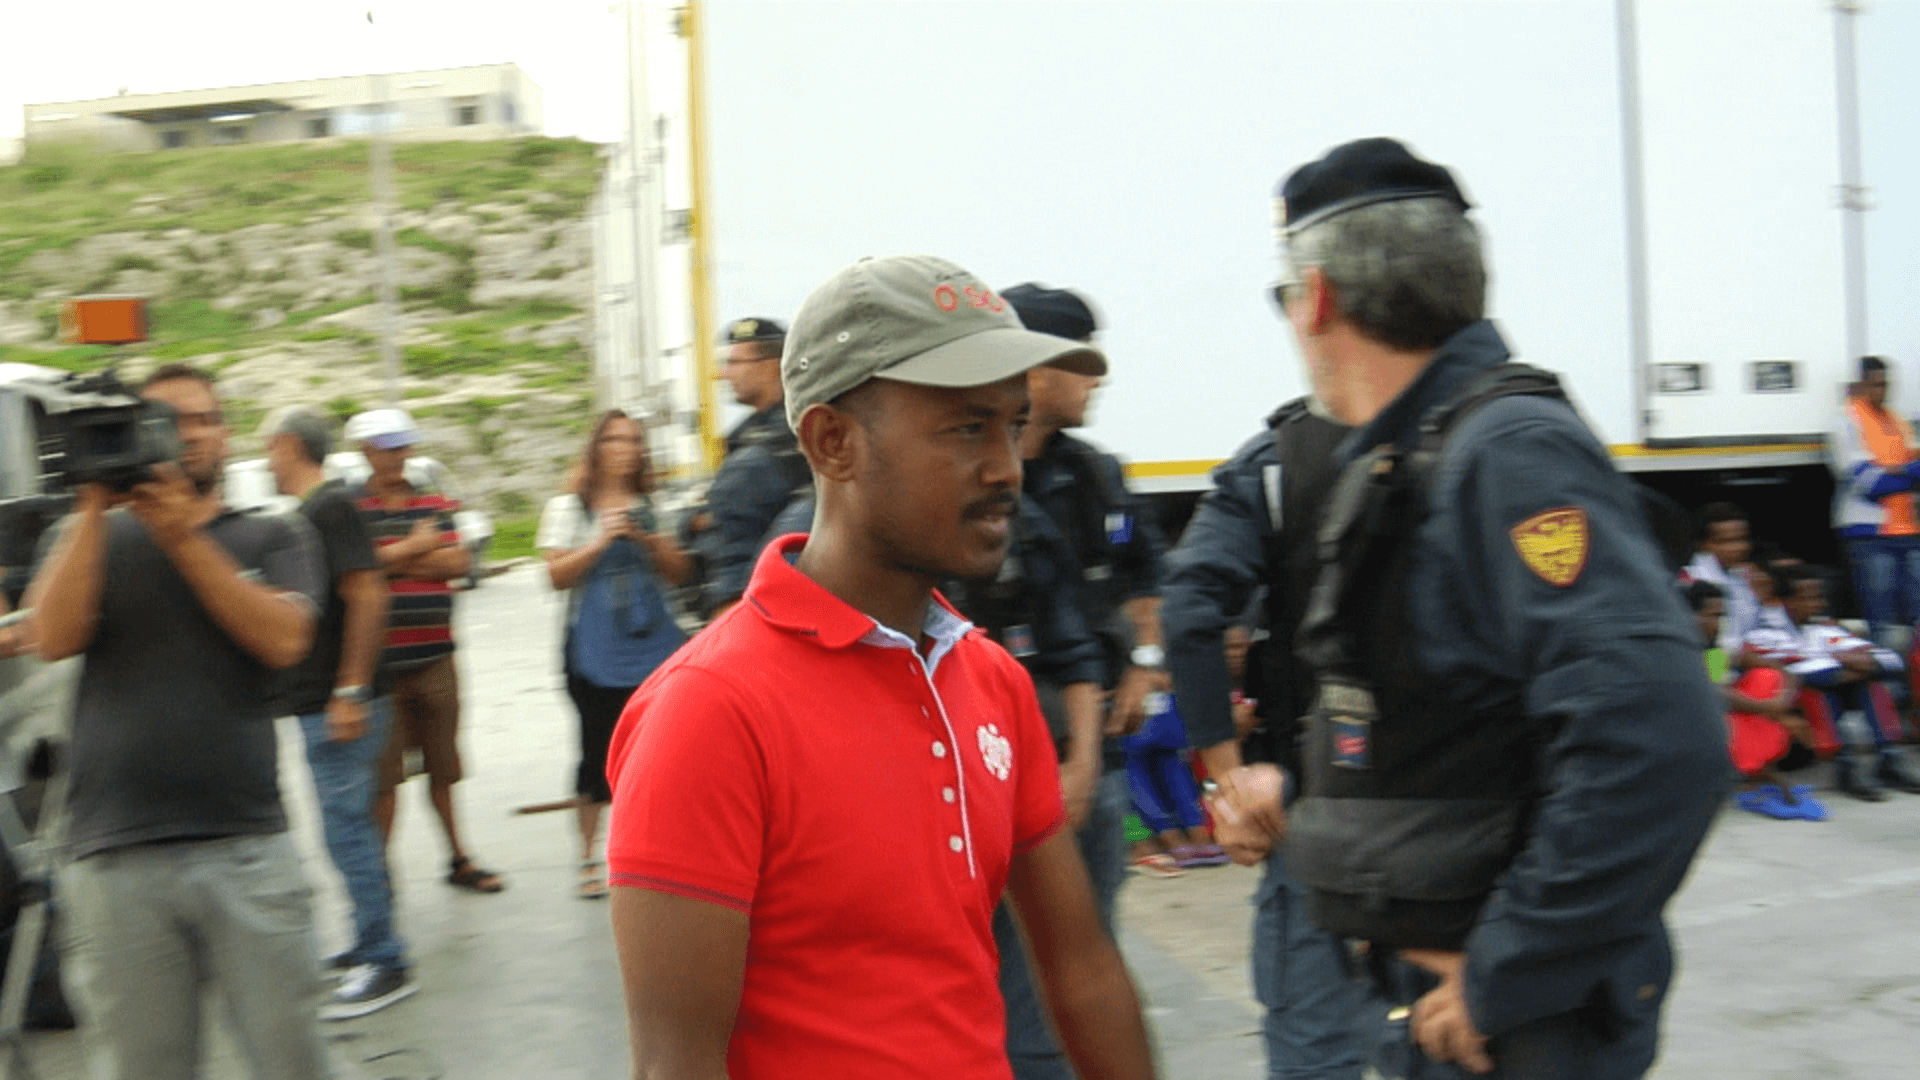 Still from It Will Be Chaos. A man wearing a bright red polo shirt and baseball hat is walking. In the background, there are people who are not in focus. There is a man filming with a large camera on his shoulder and there are several men dressed in military clothes, wearing black utility vests and black berets.